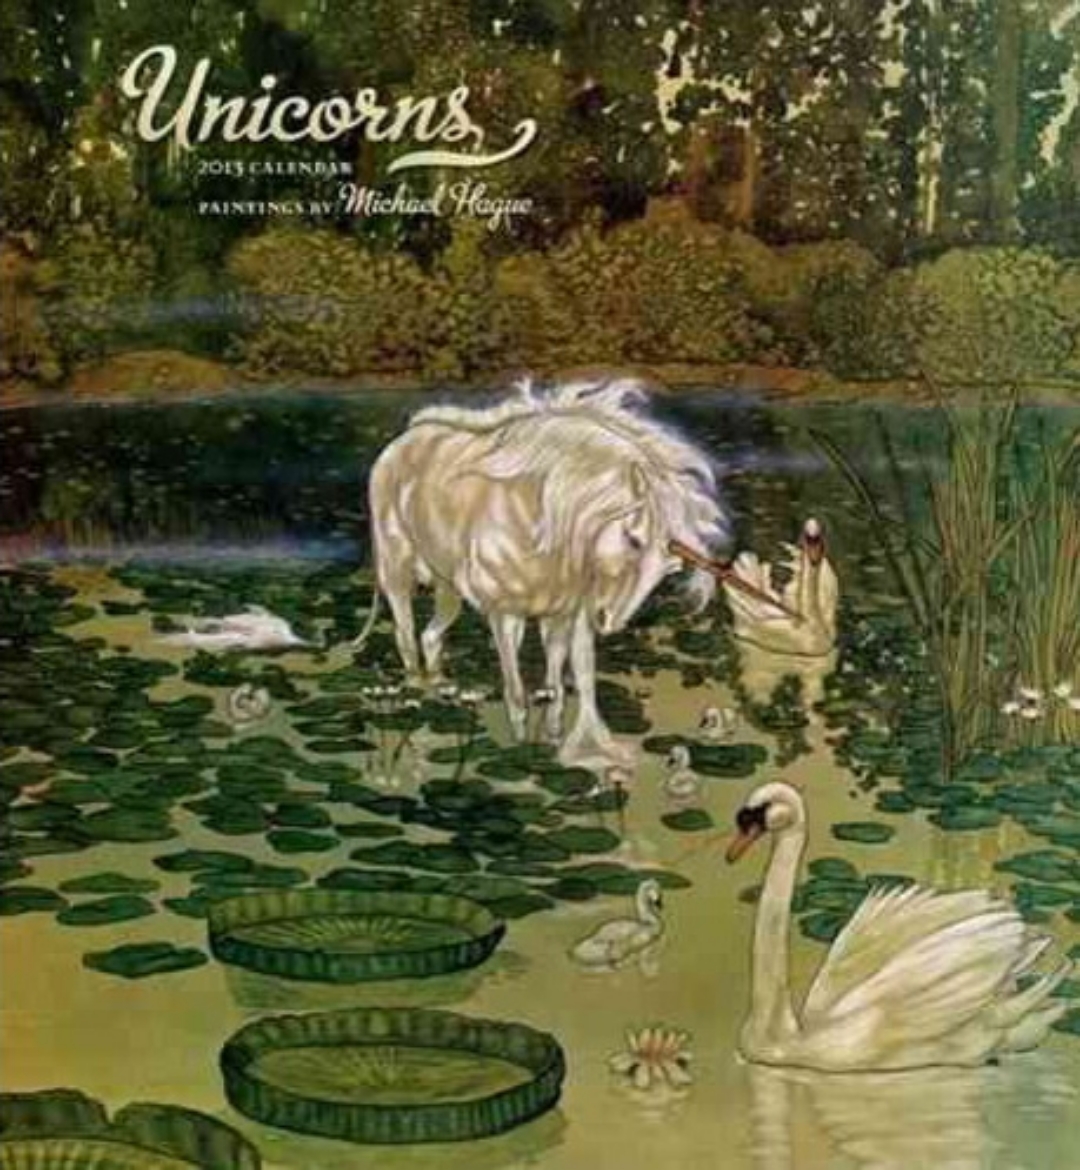 Picture of Unicorns by Michael Hague, 2013